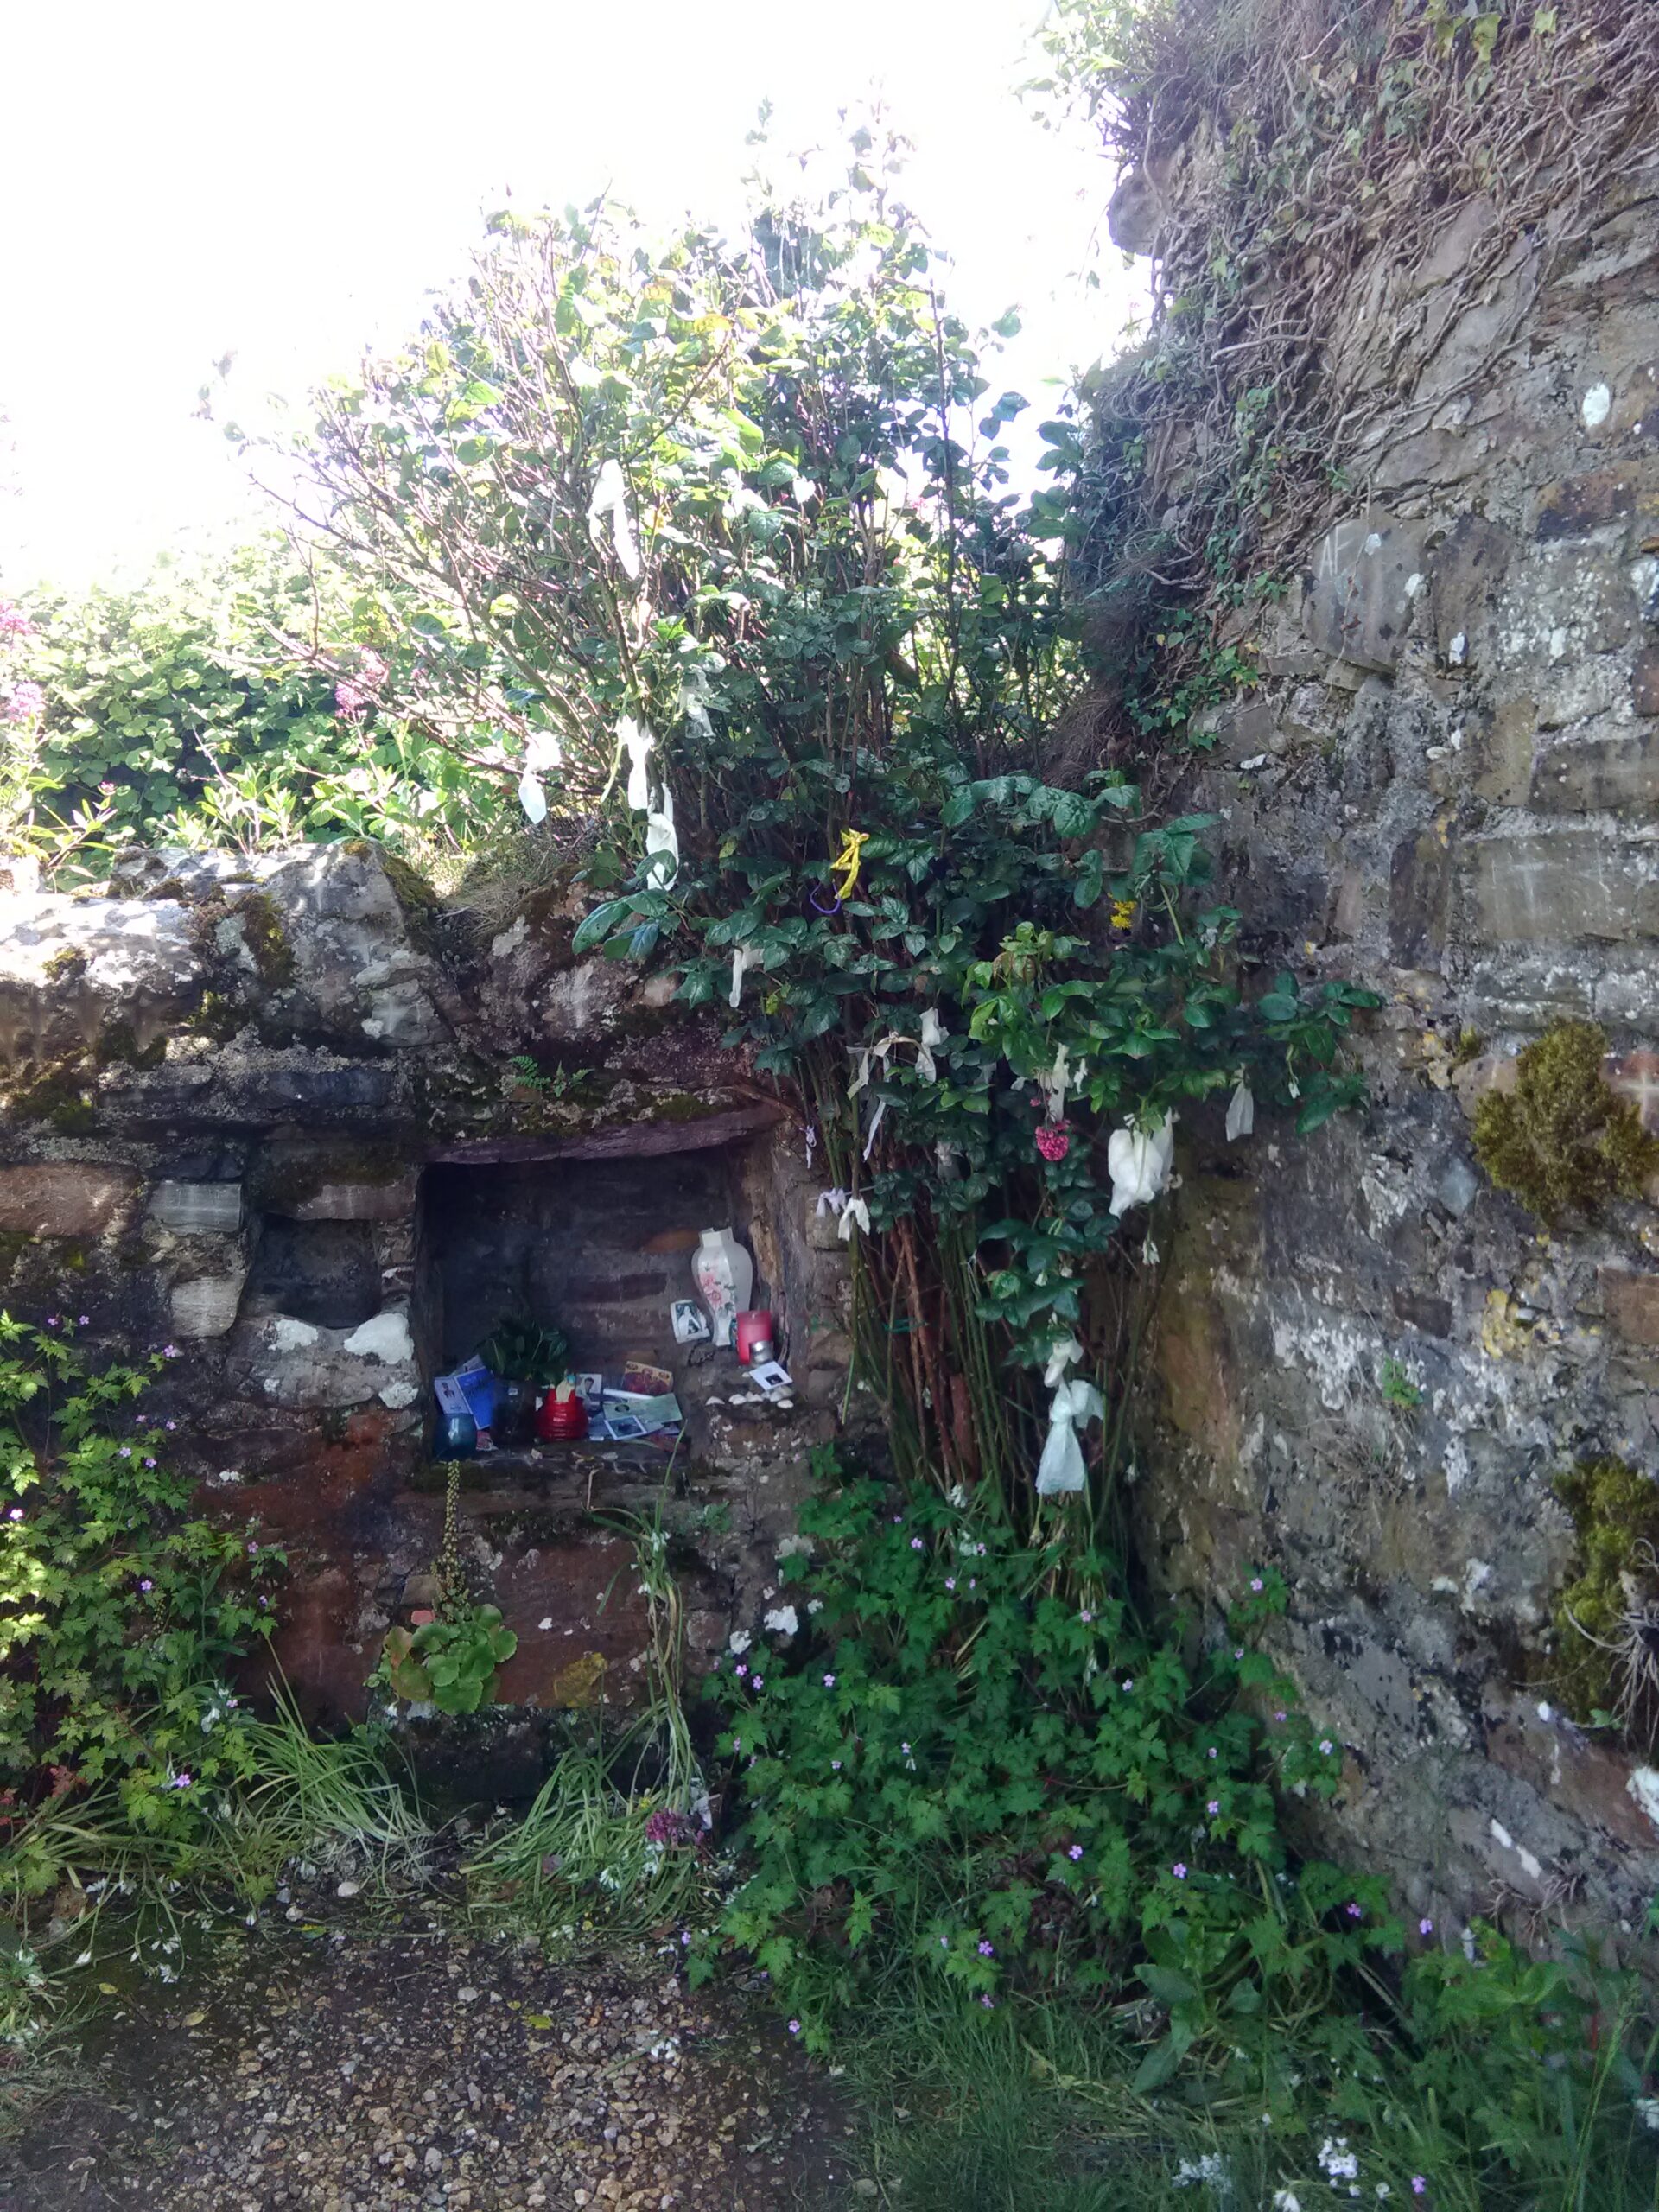 Offerings and rag tree near St Declan’s Well, Co. Waterford, by Conchúr Mag Eacháin (photographer).